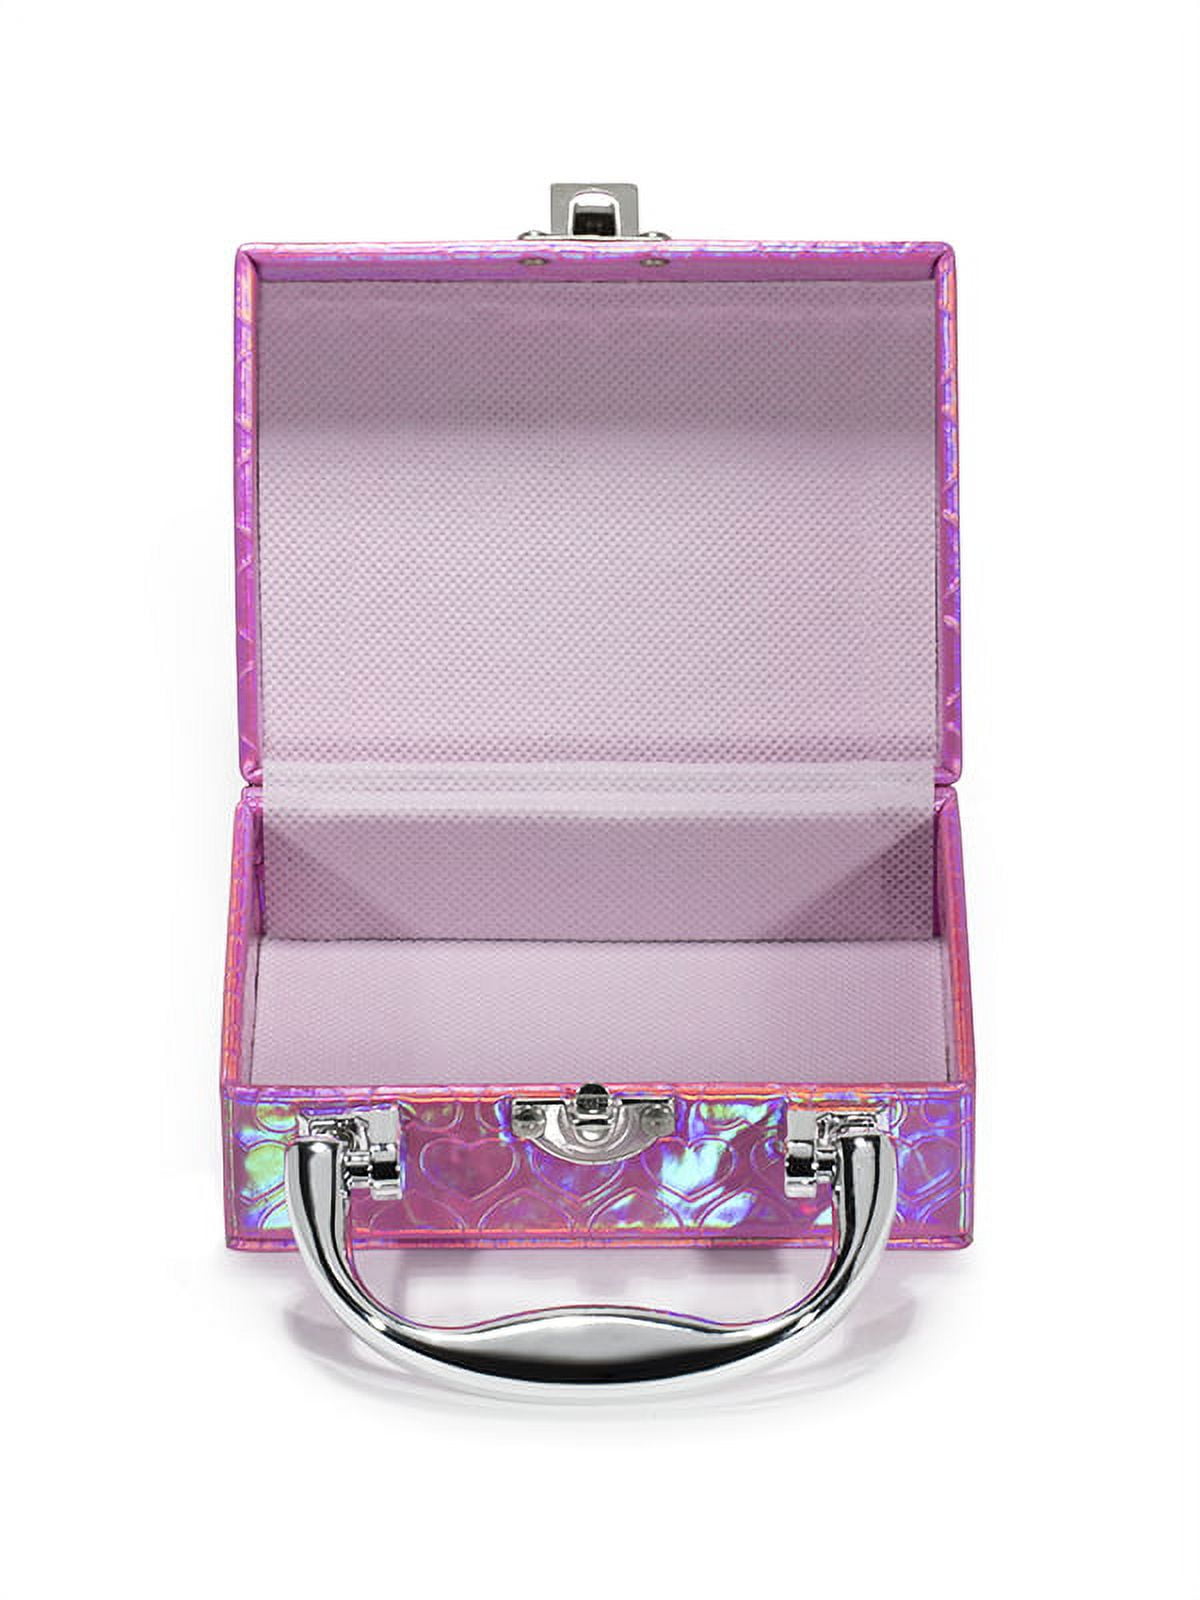 Claire's Girls Club Tiny Travel Makeup Set For Little Girls, Holographic  Case, Cute Gift, 74429 